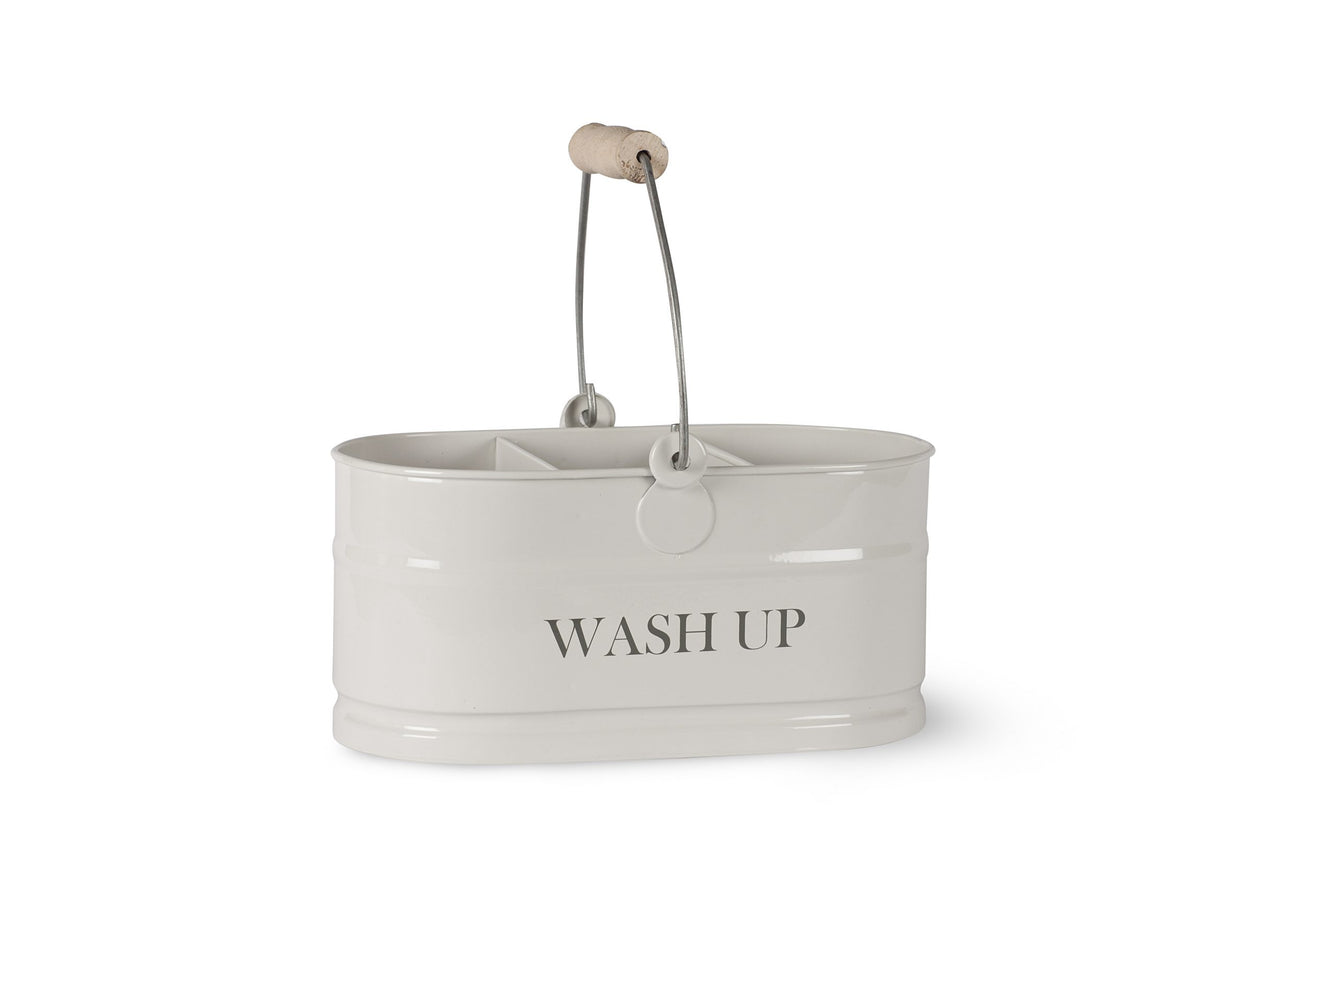 Garden Trading Wash Up Tidy Caddy Holder Shabby Chic with Rustic Wooden Handle in 2 colours